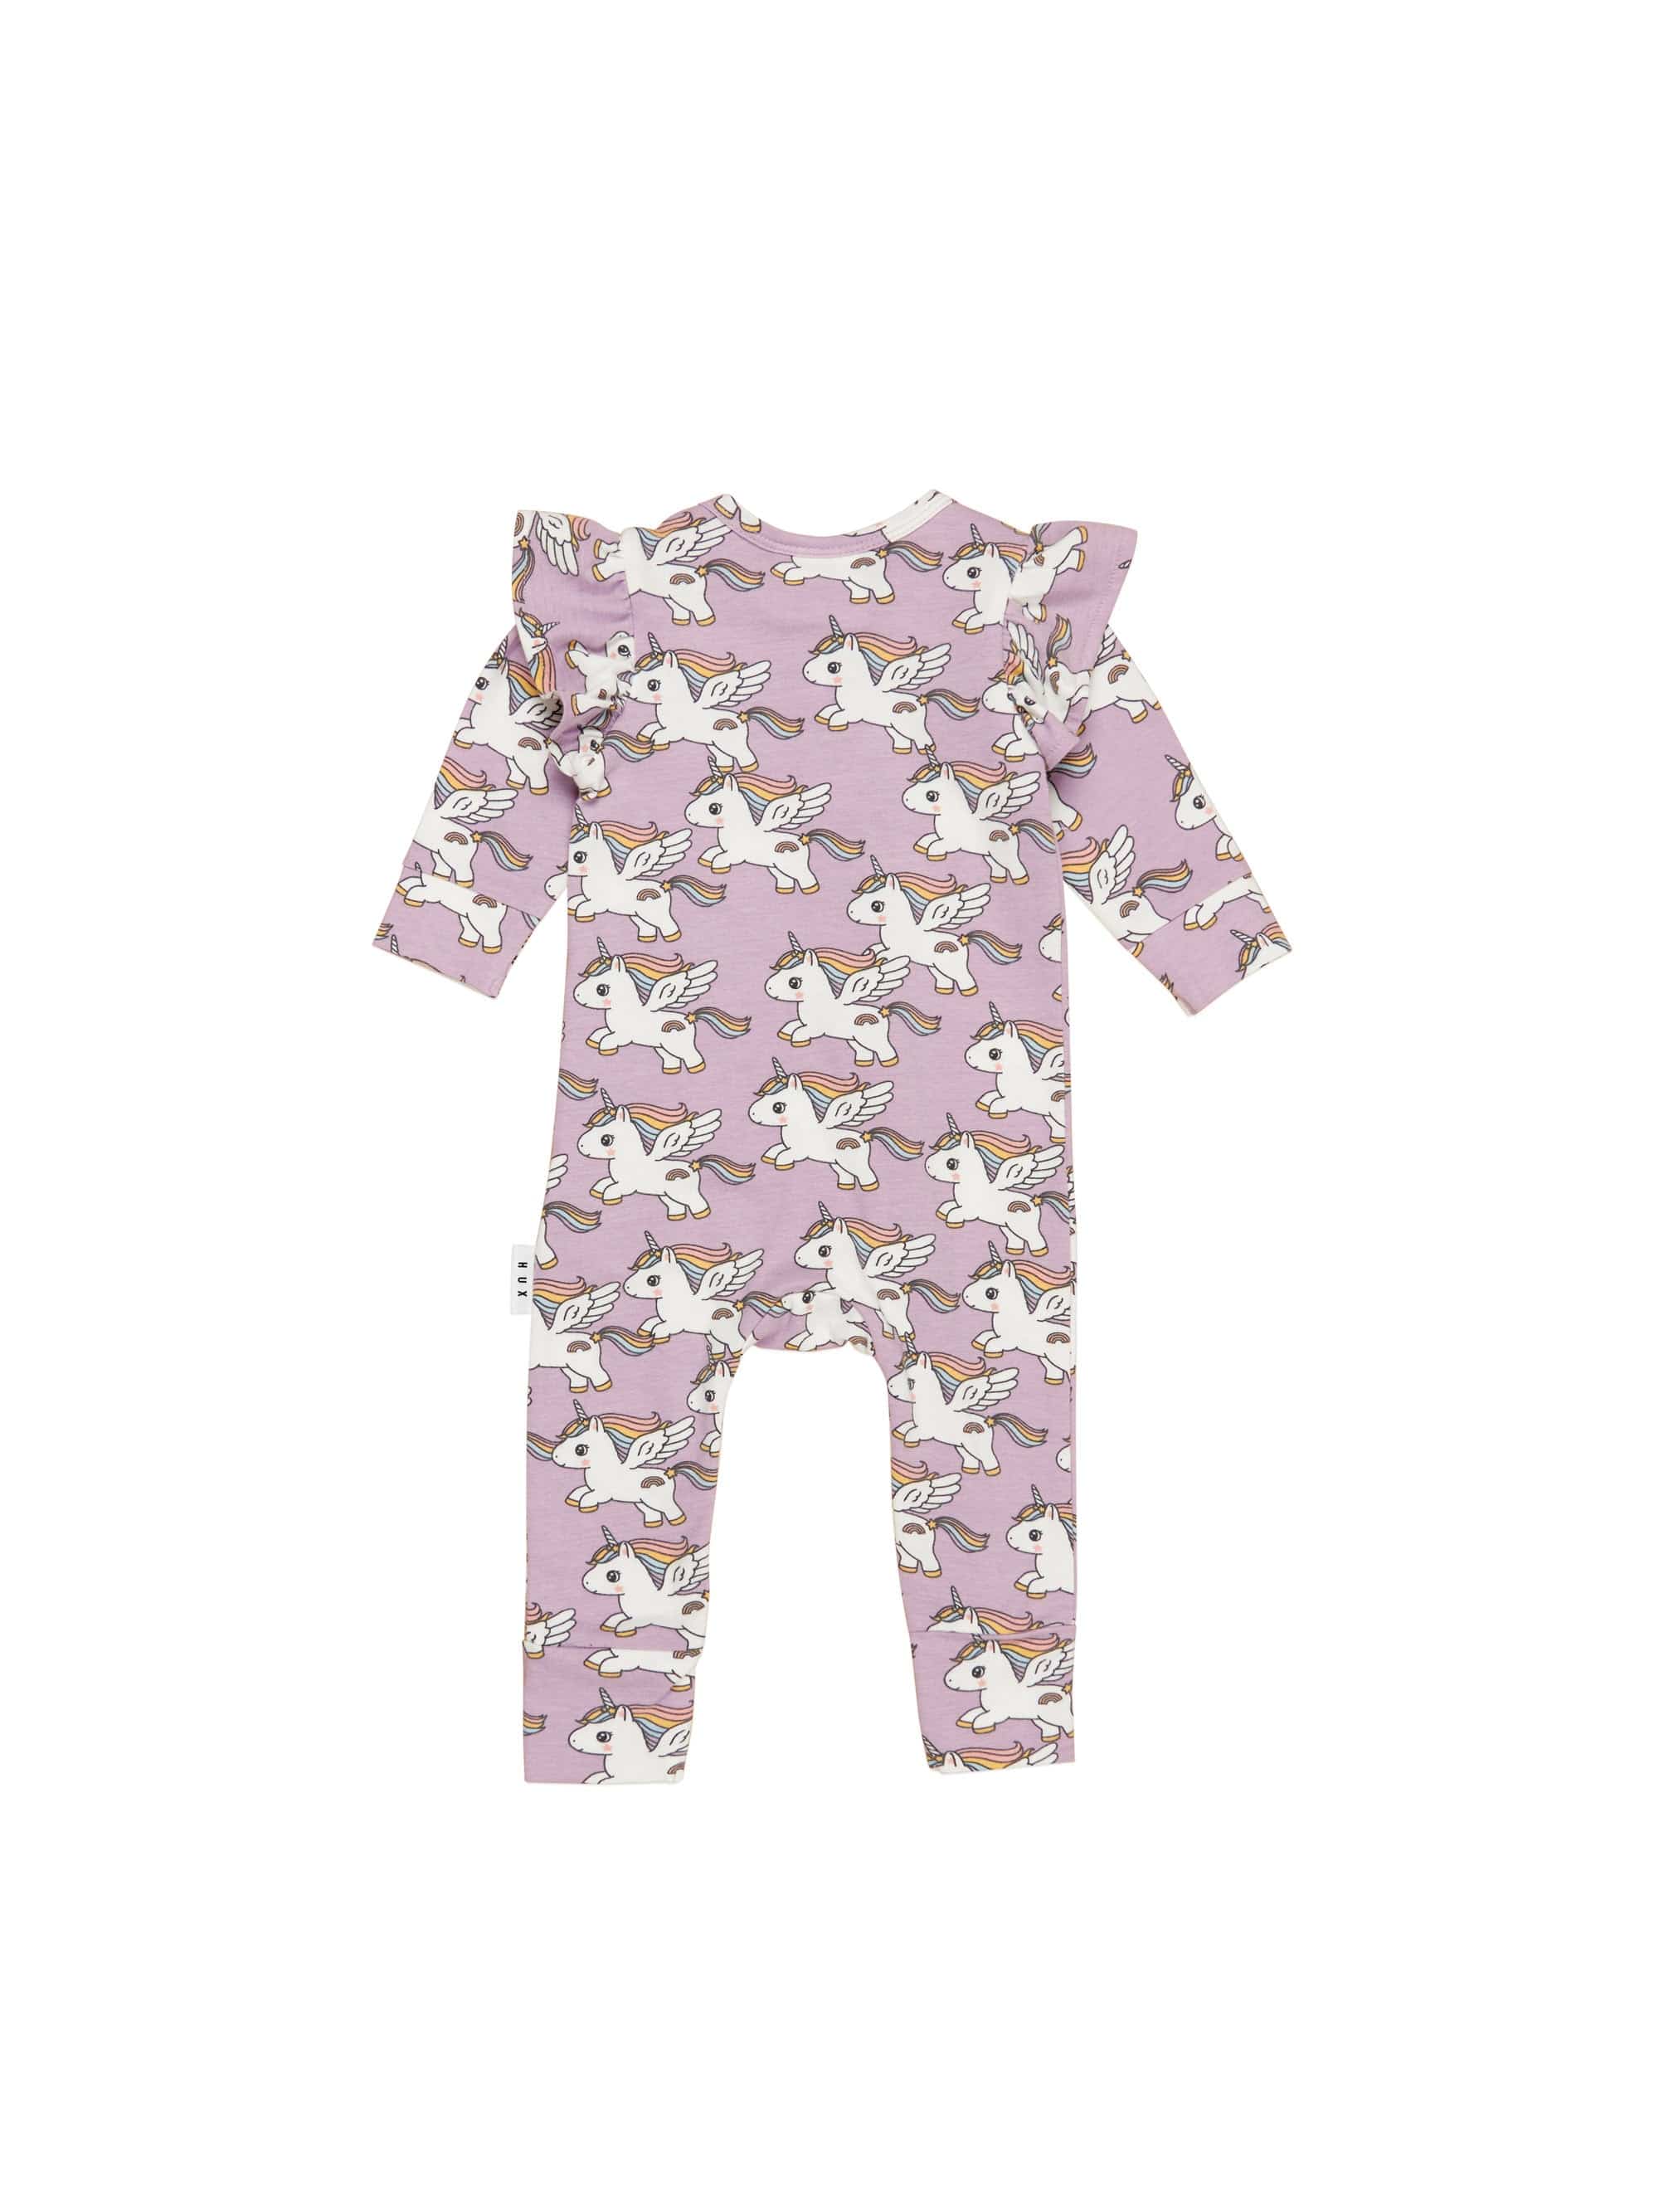 Huxbaby Girls All In One 0-3M Magical Unicorn Frill Romper